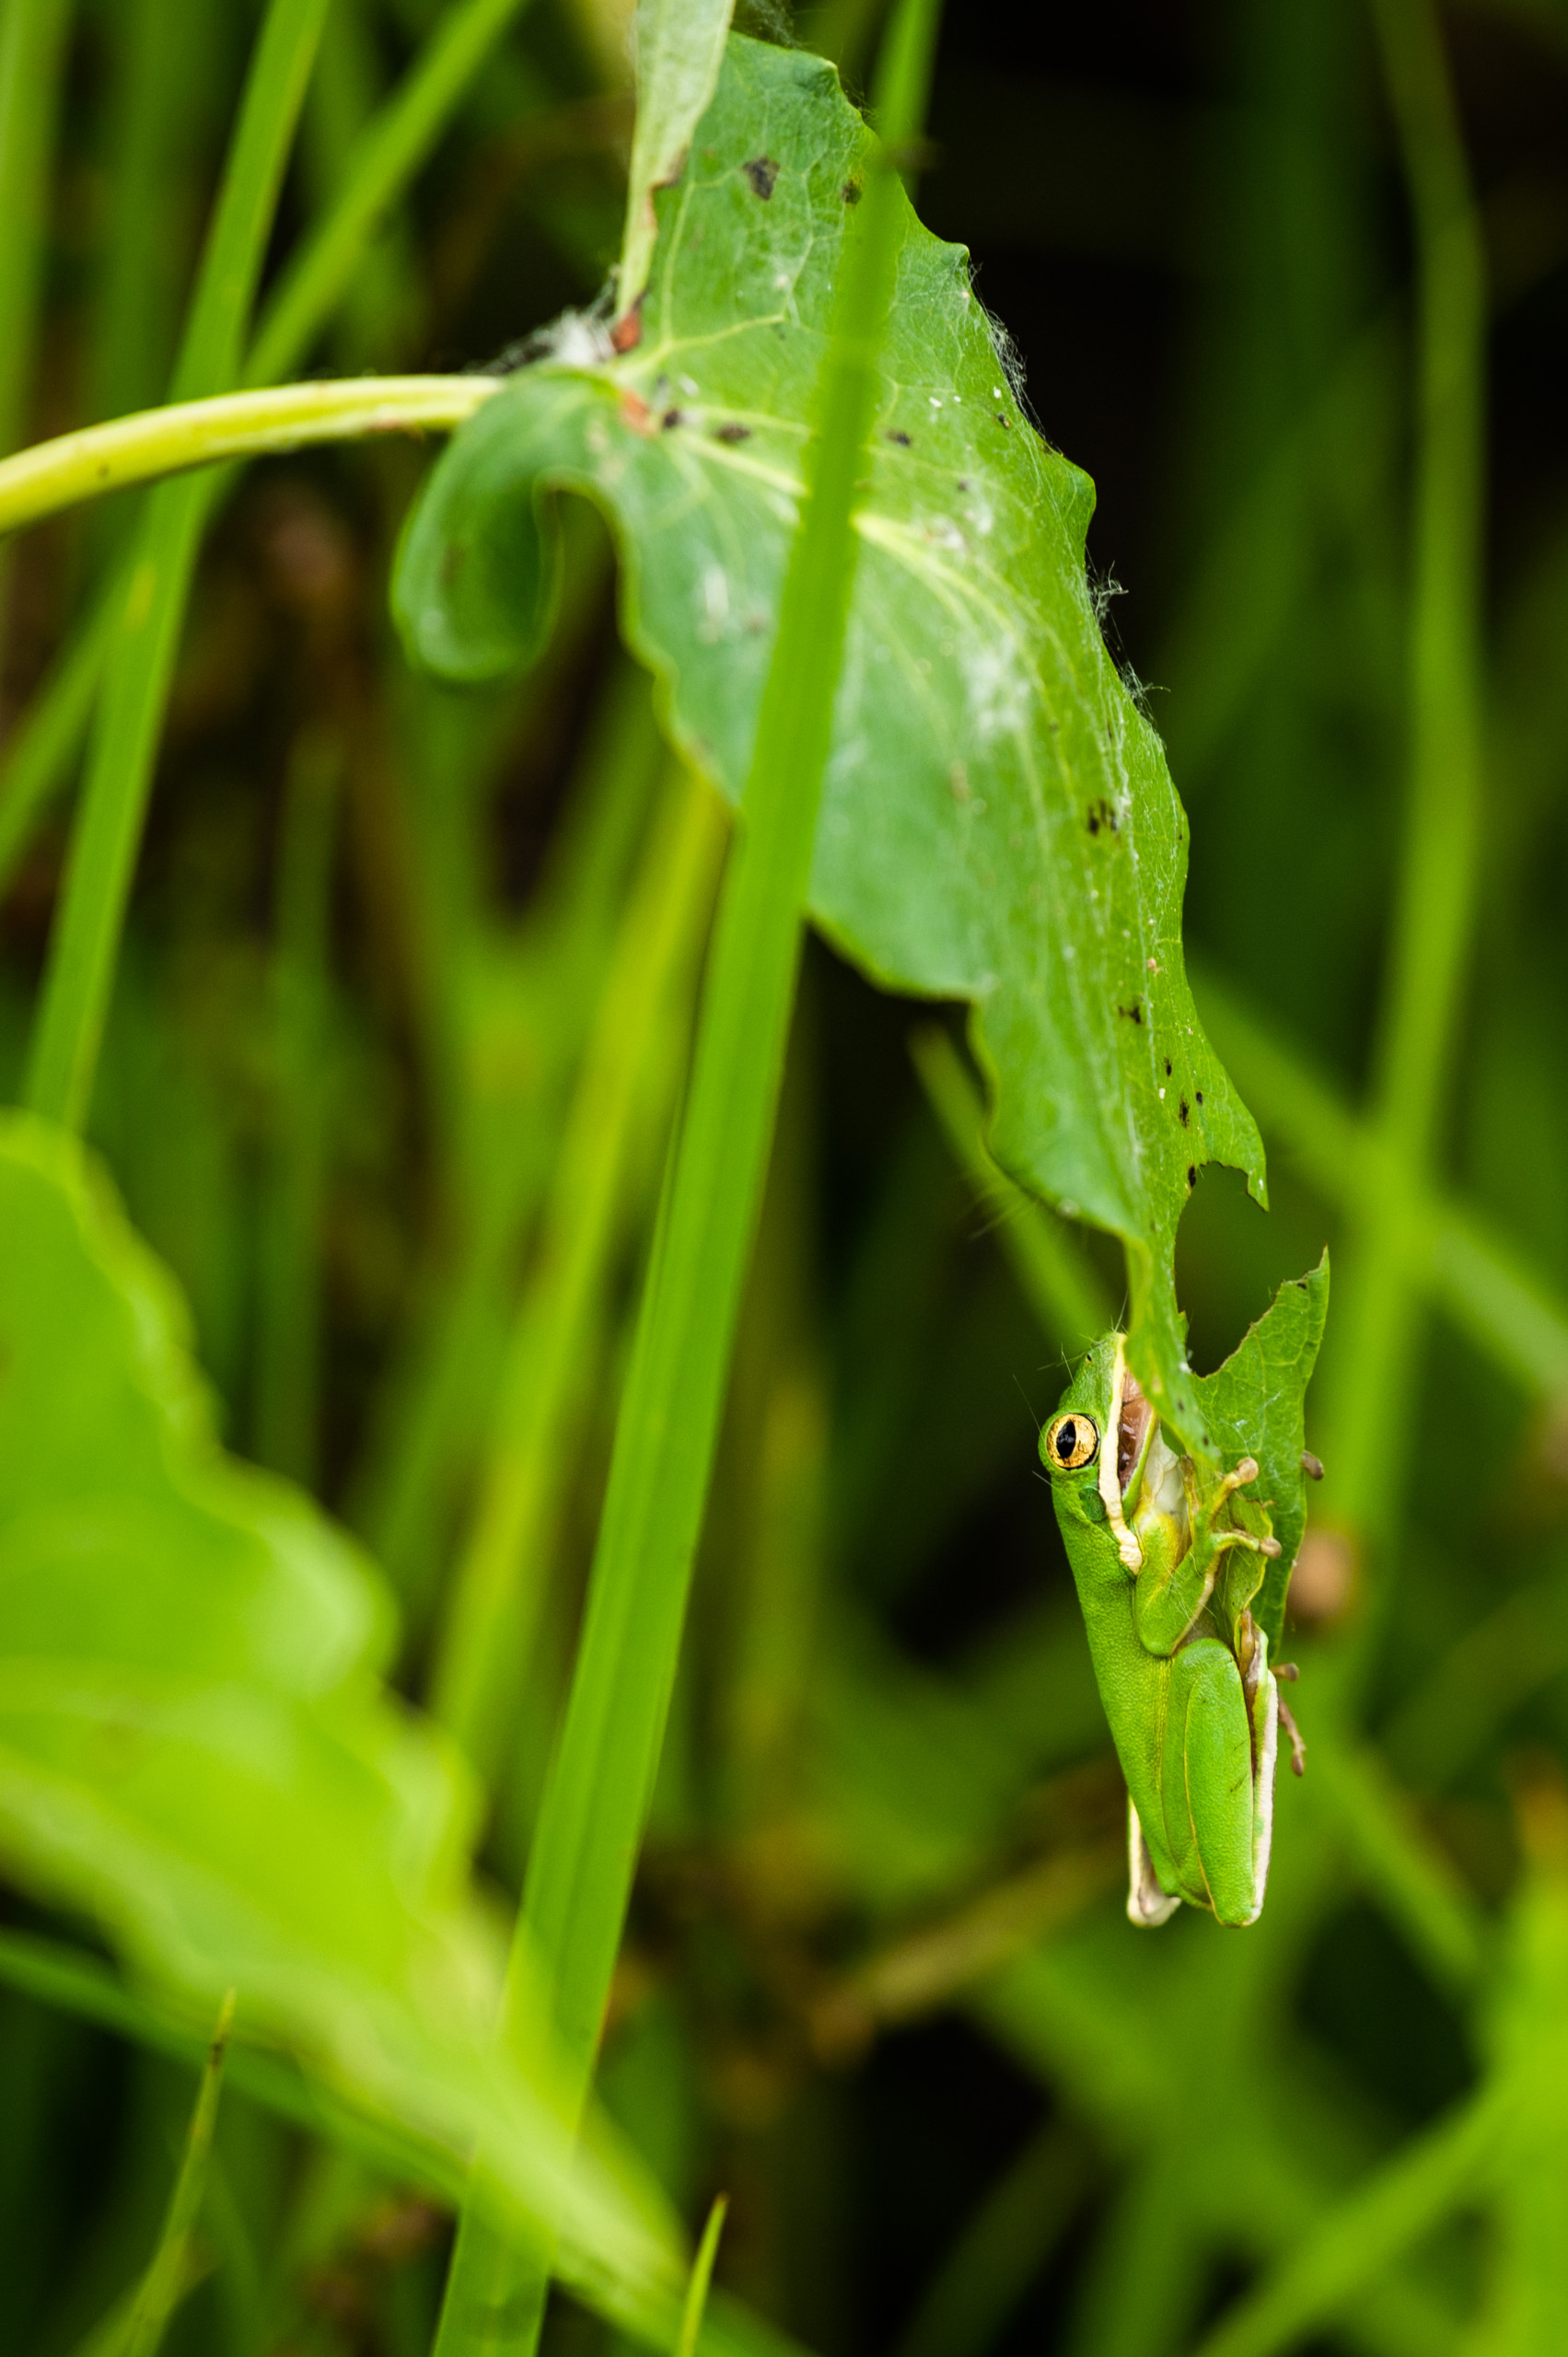 A small frog eats while perched on a leaf